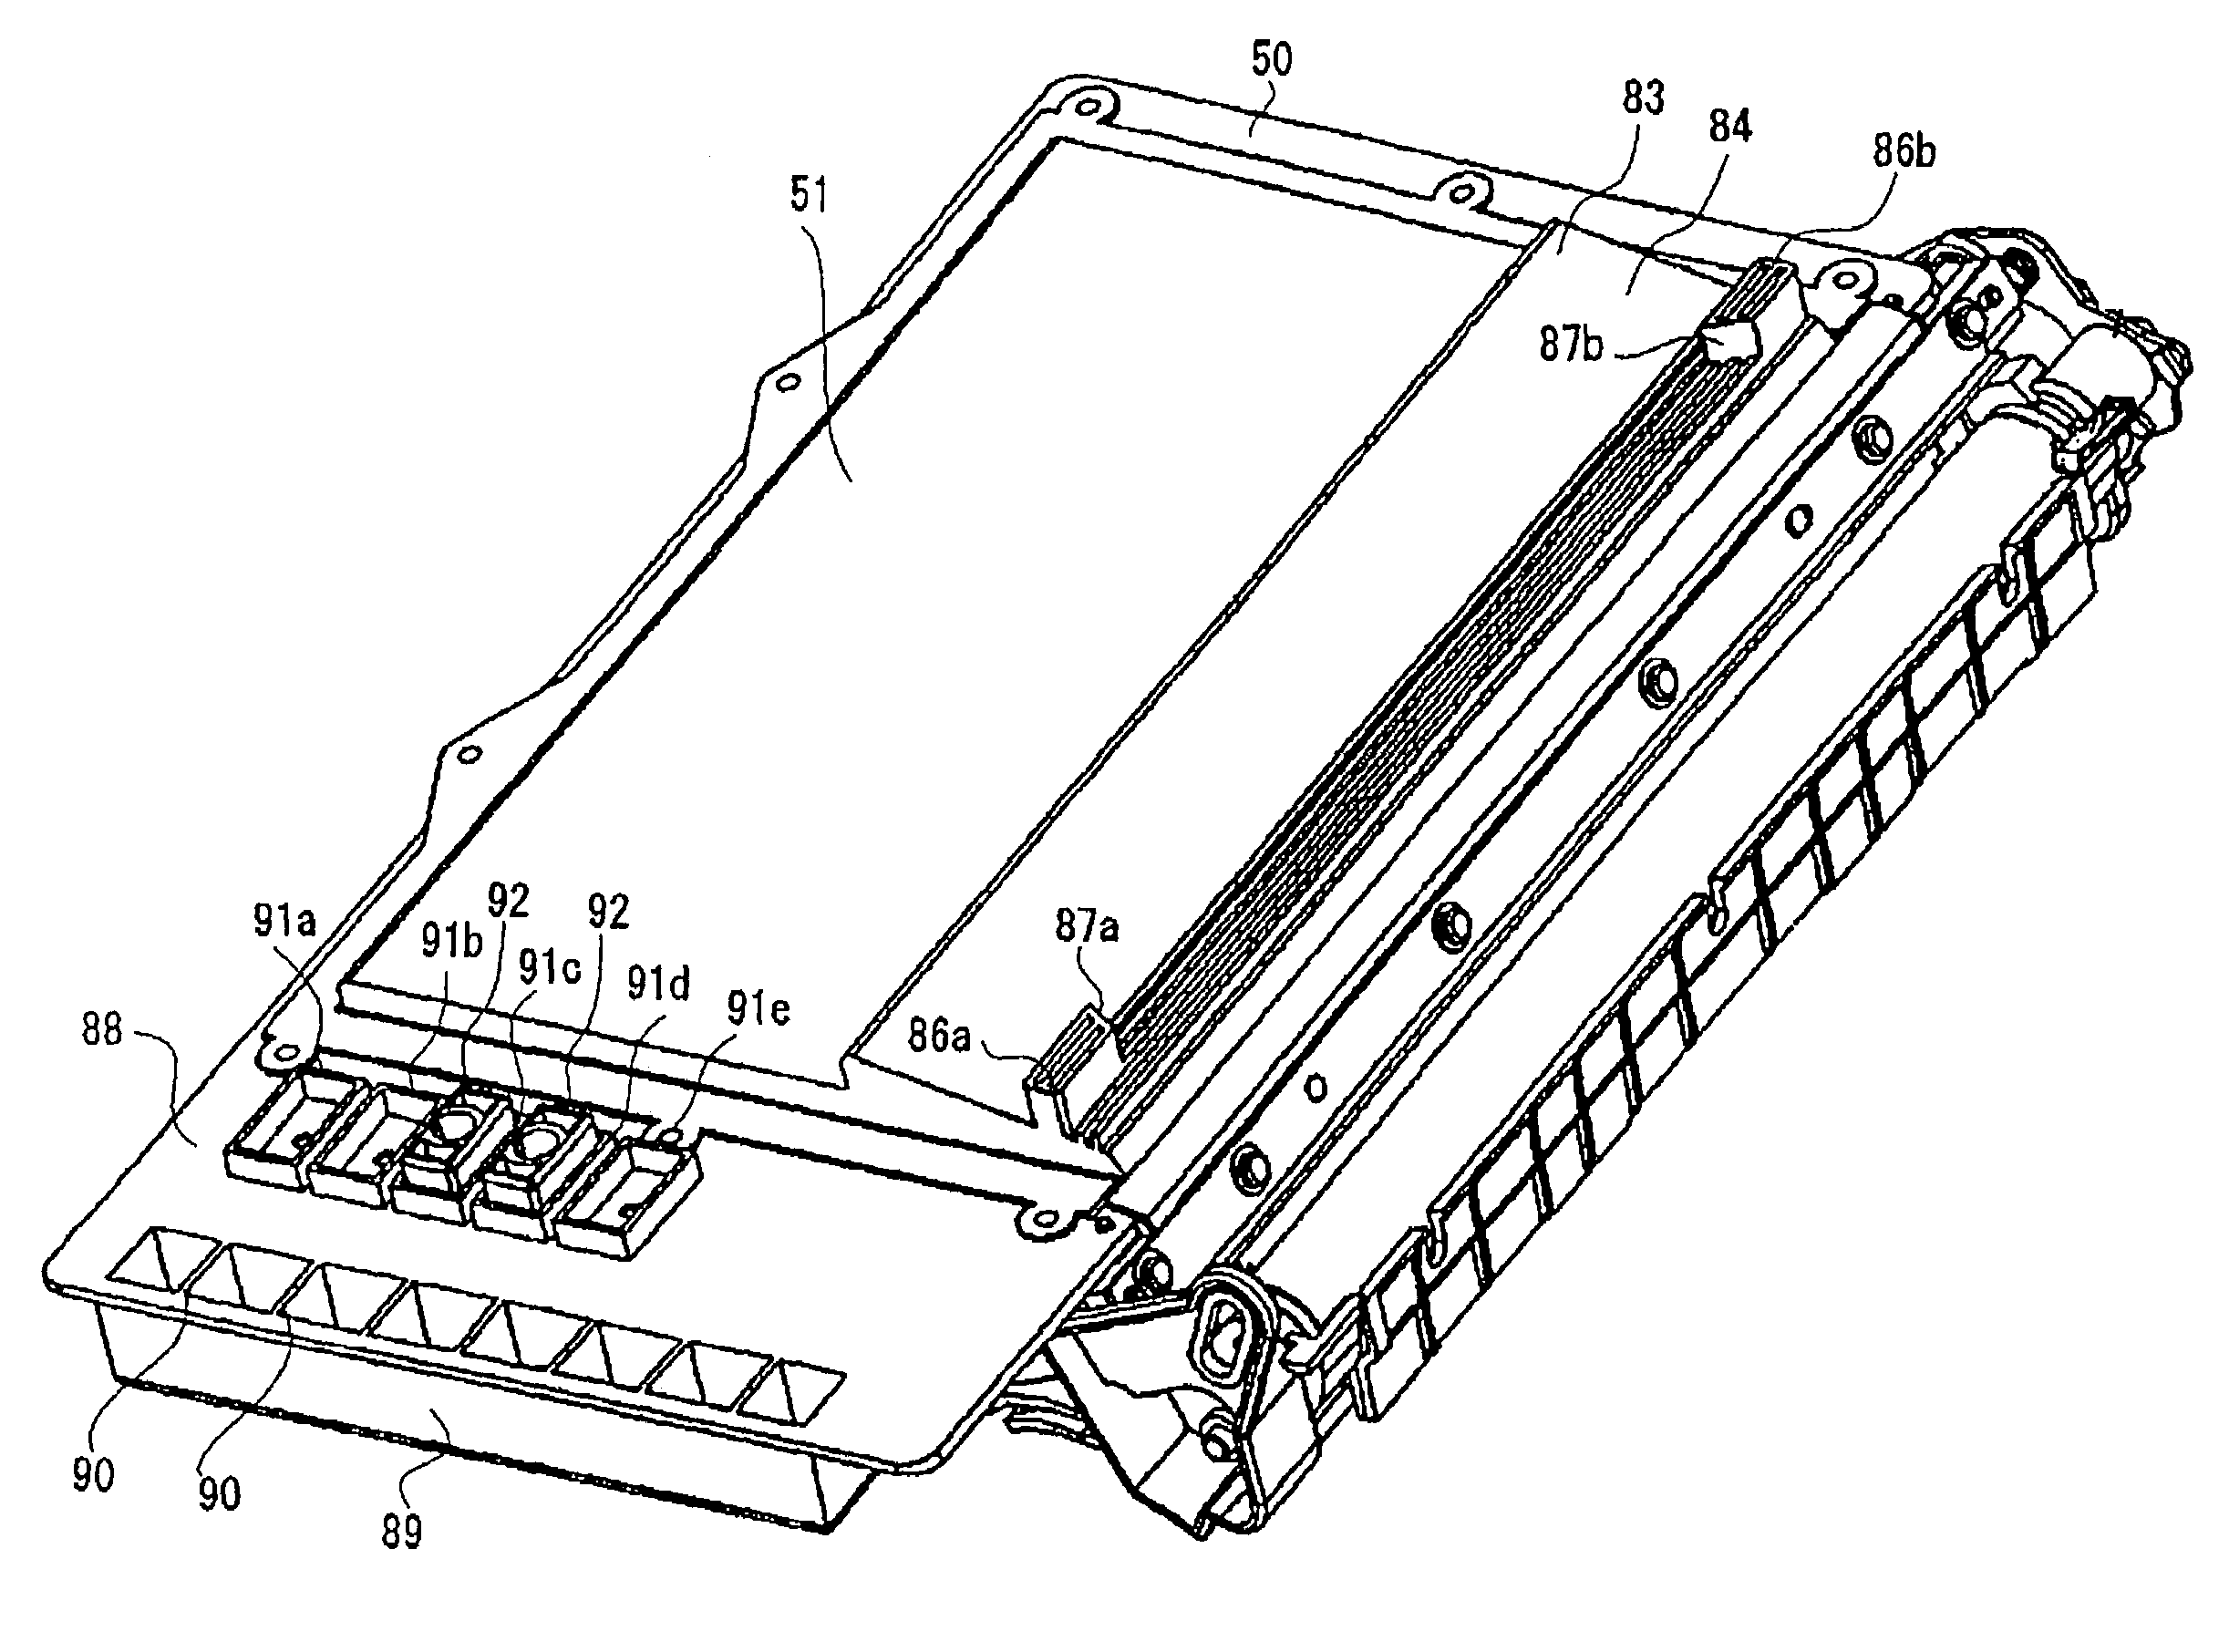 Image forming device and insertable developing unit with identification protrusions for determining compatibility